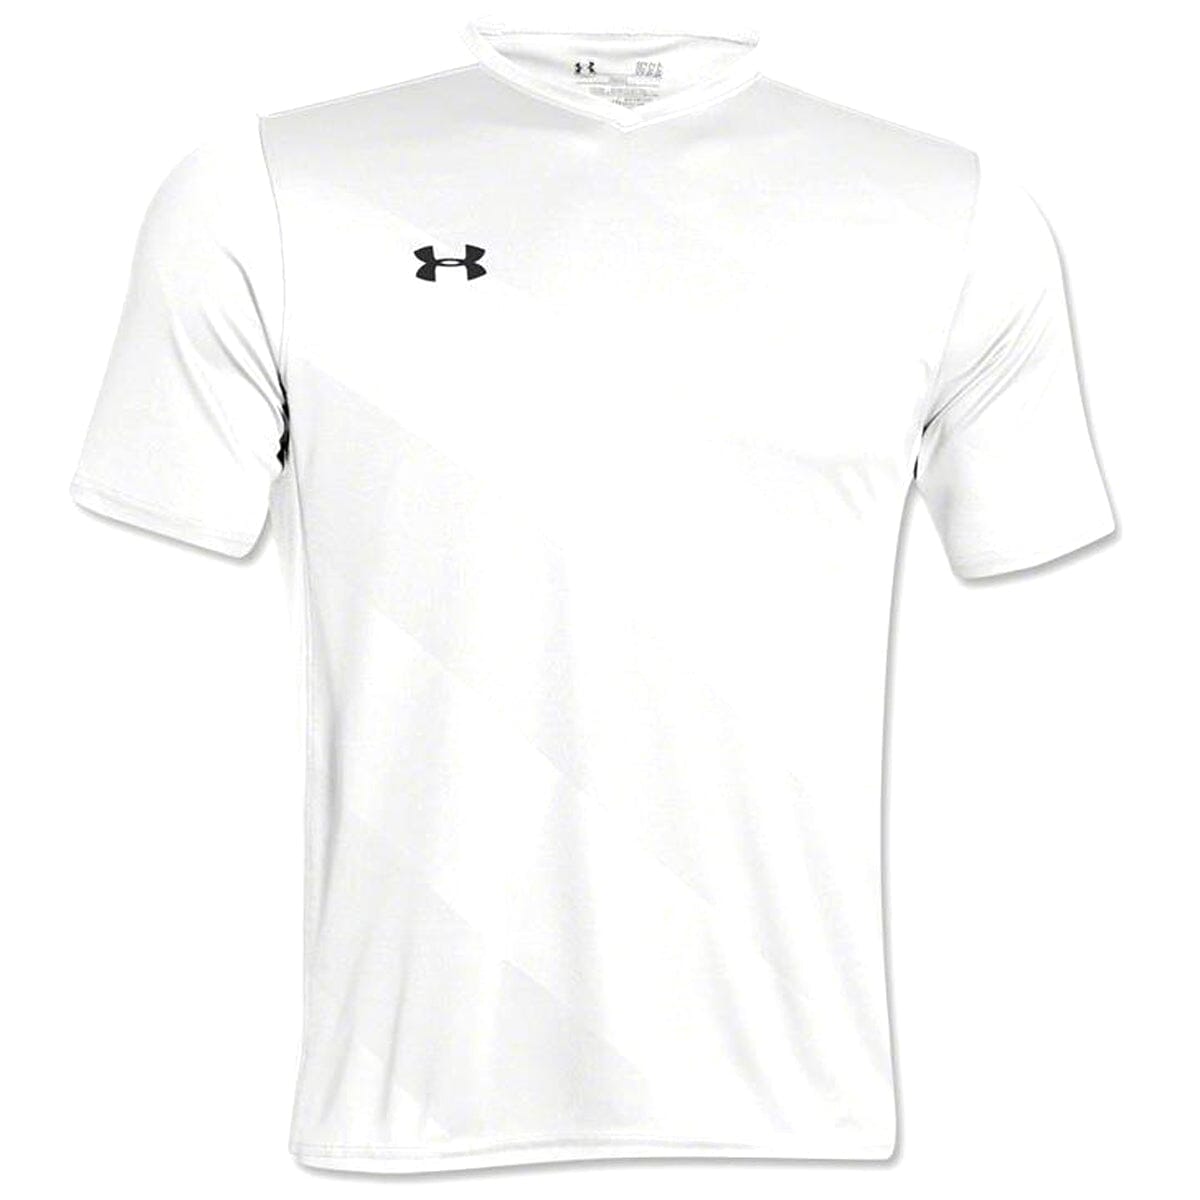 Home / All / Under Armour Fixture Youth Soccer Jersey - White